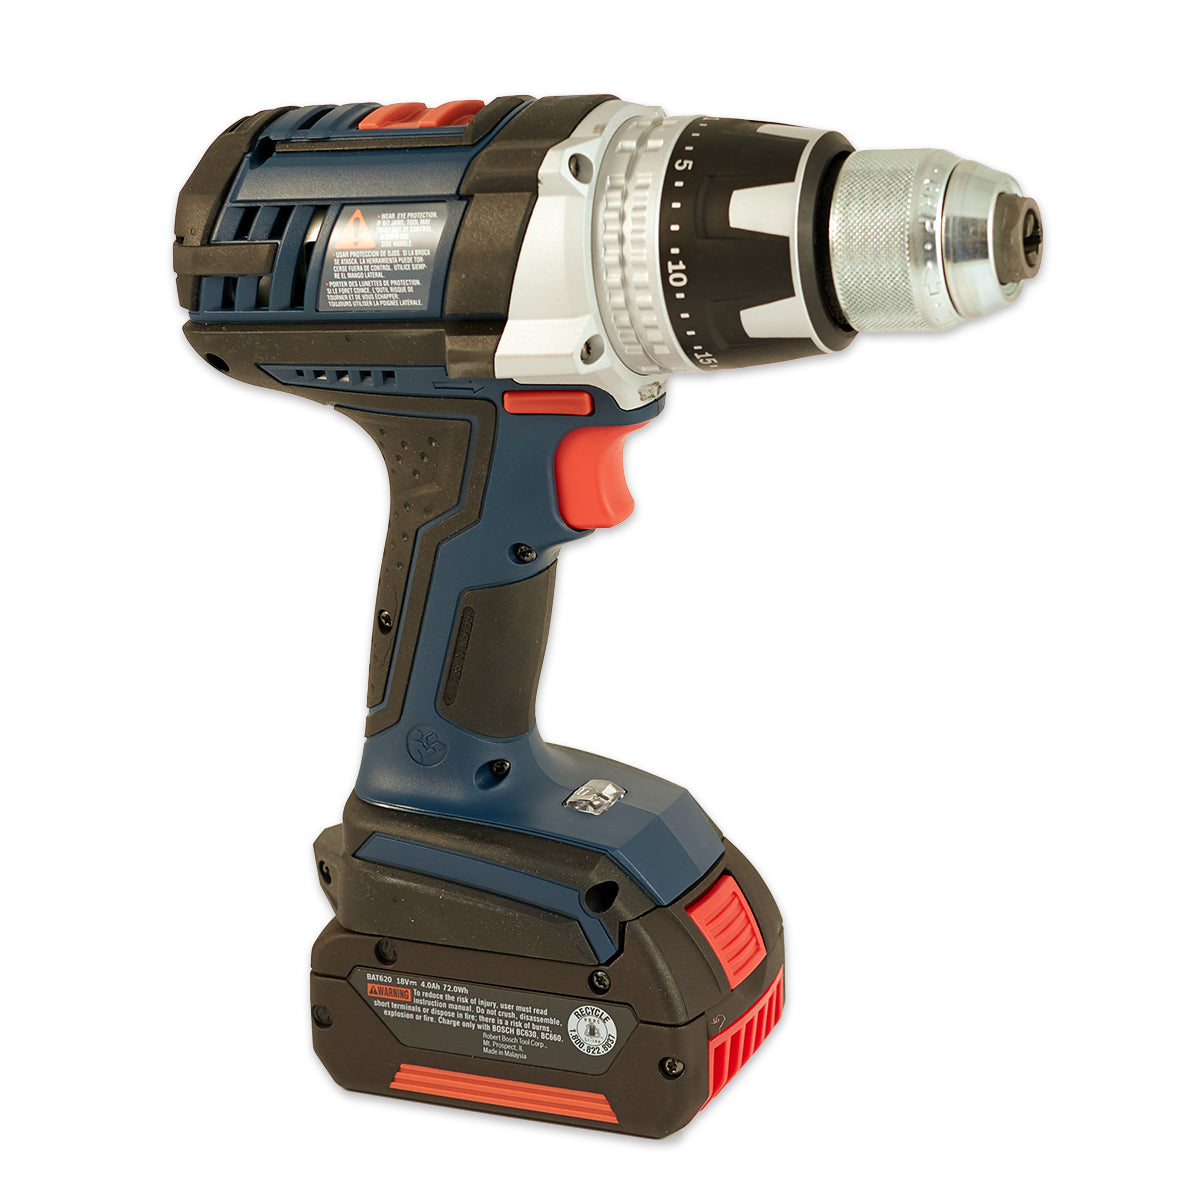 18 Volt Bosch Cordless Drill Kit (includes case, 2 batteries and charger) - While Supply Lasts